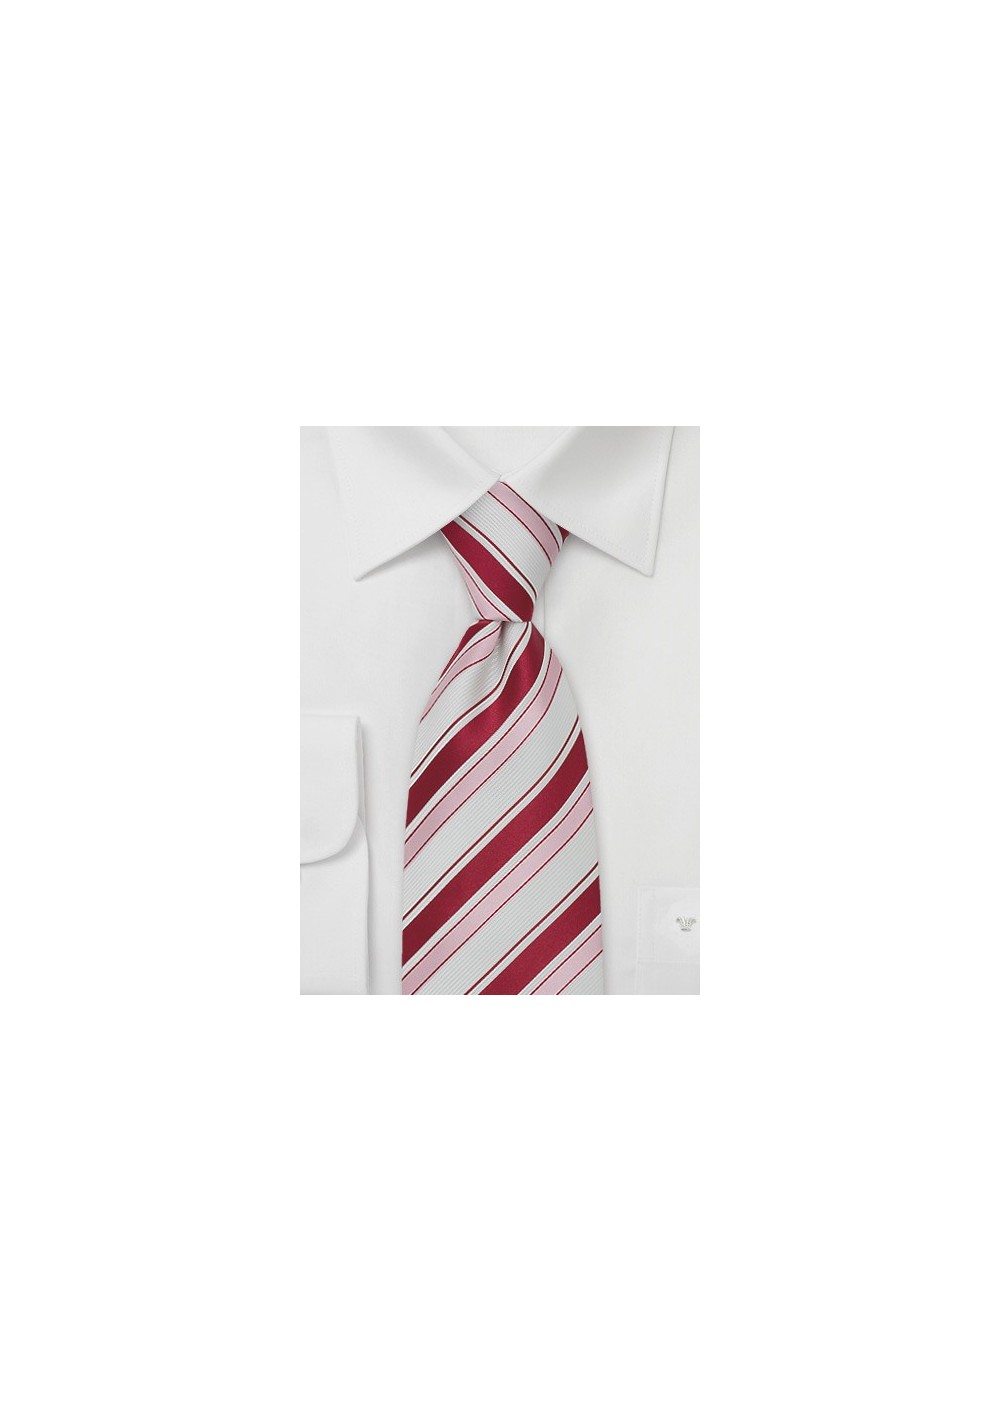 Striped Mens Tie in White, Fuchsia, and Pink